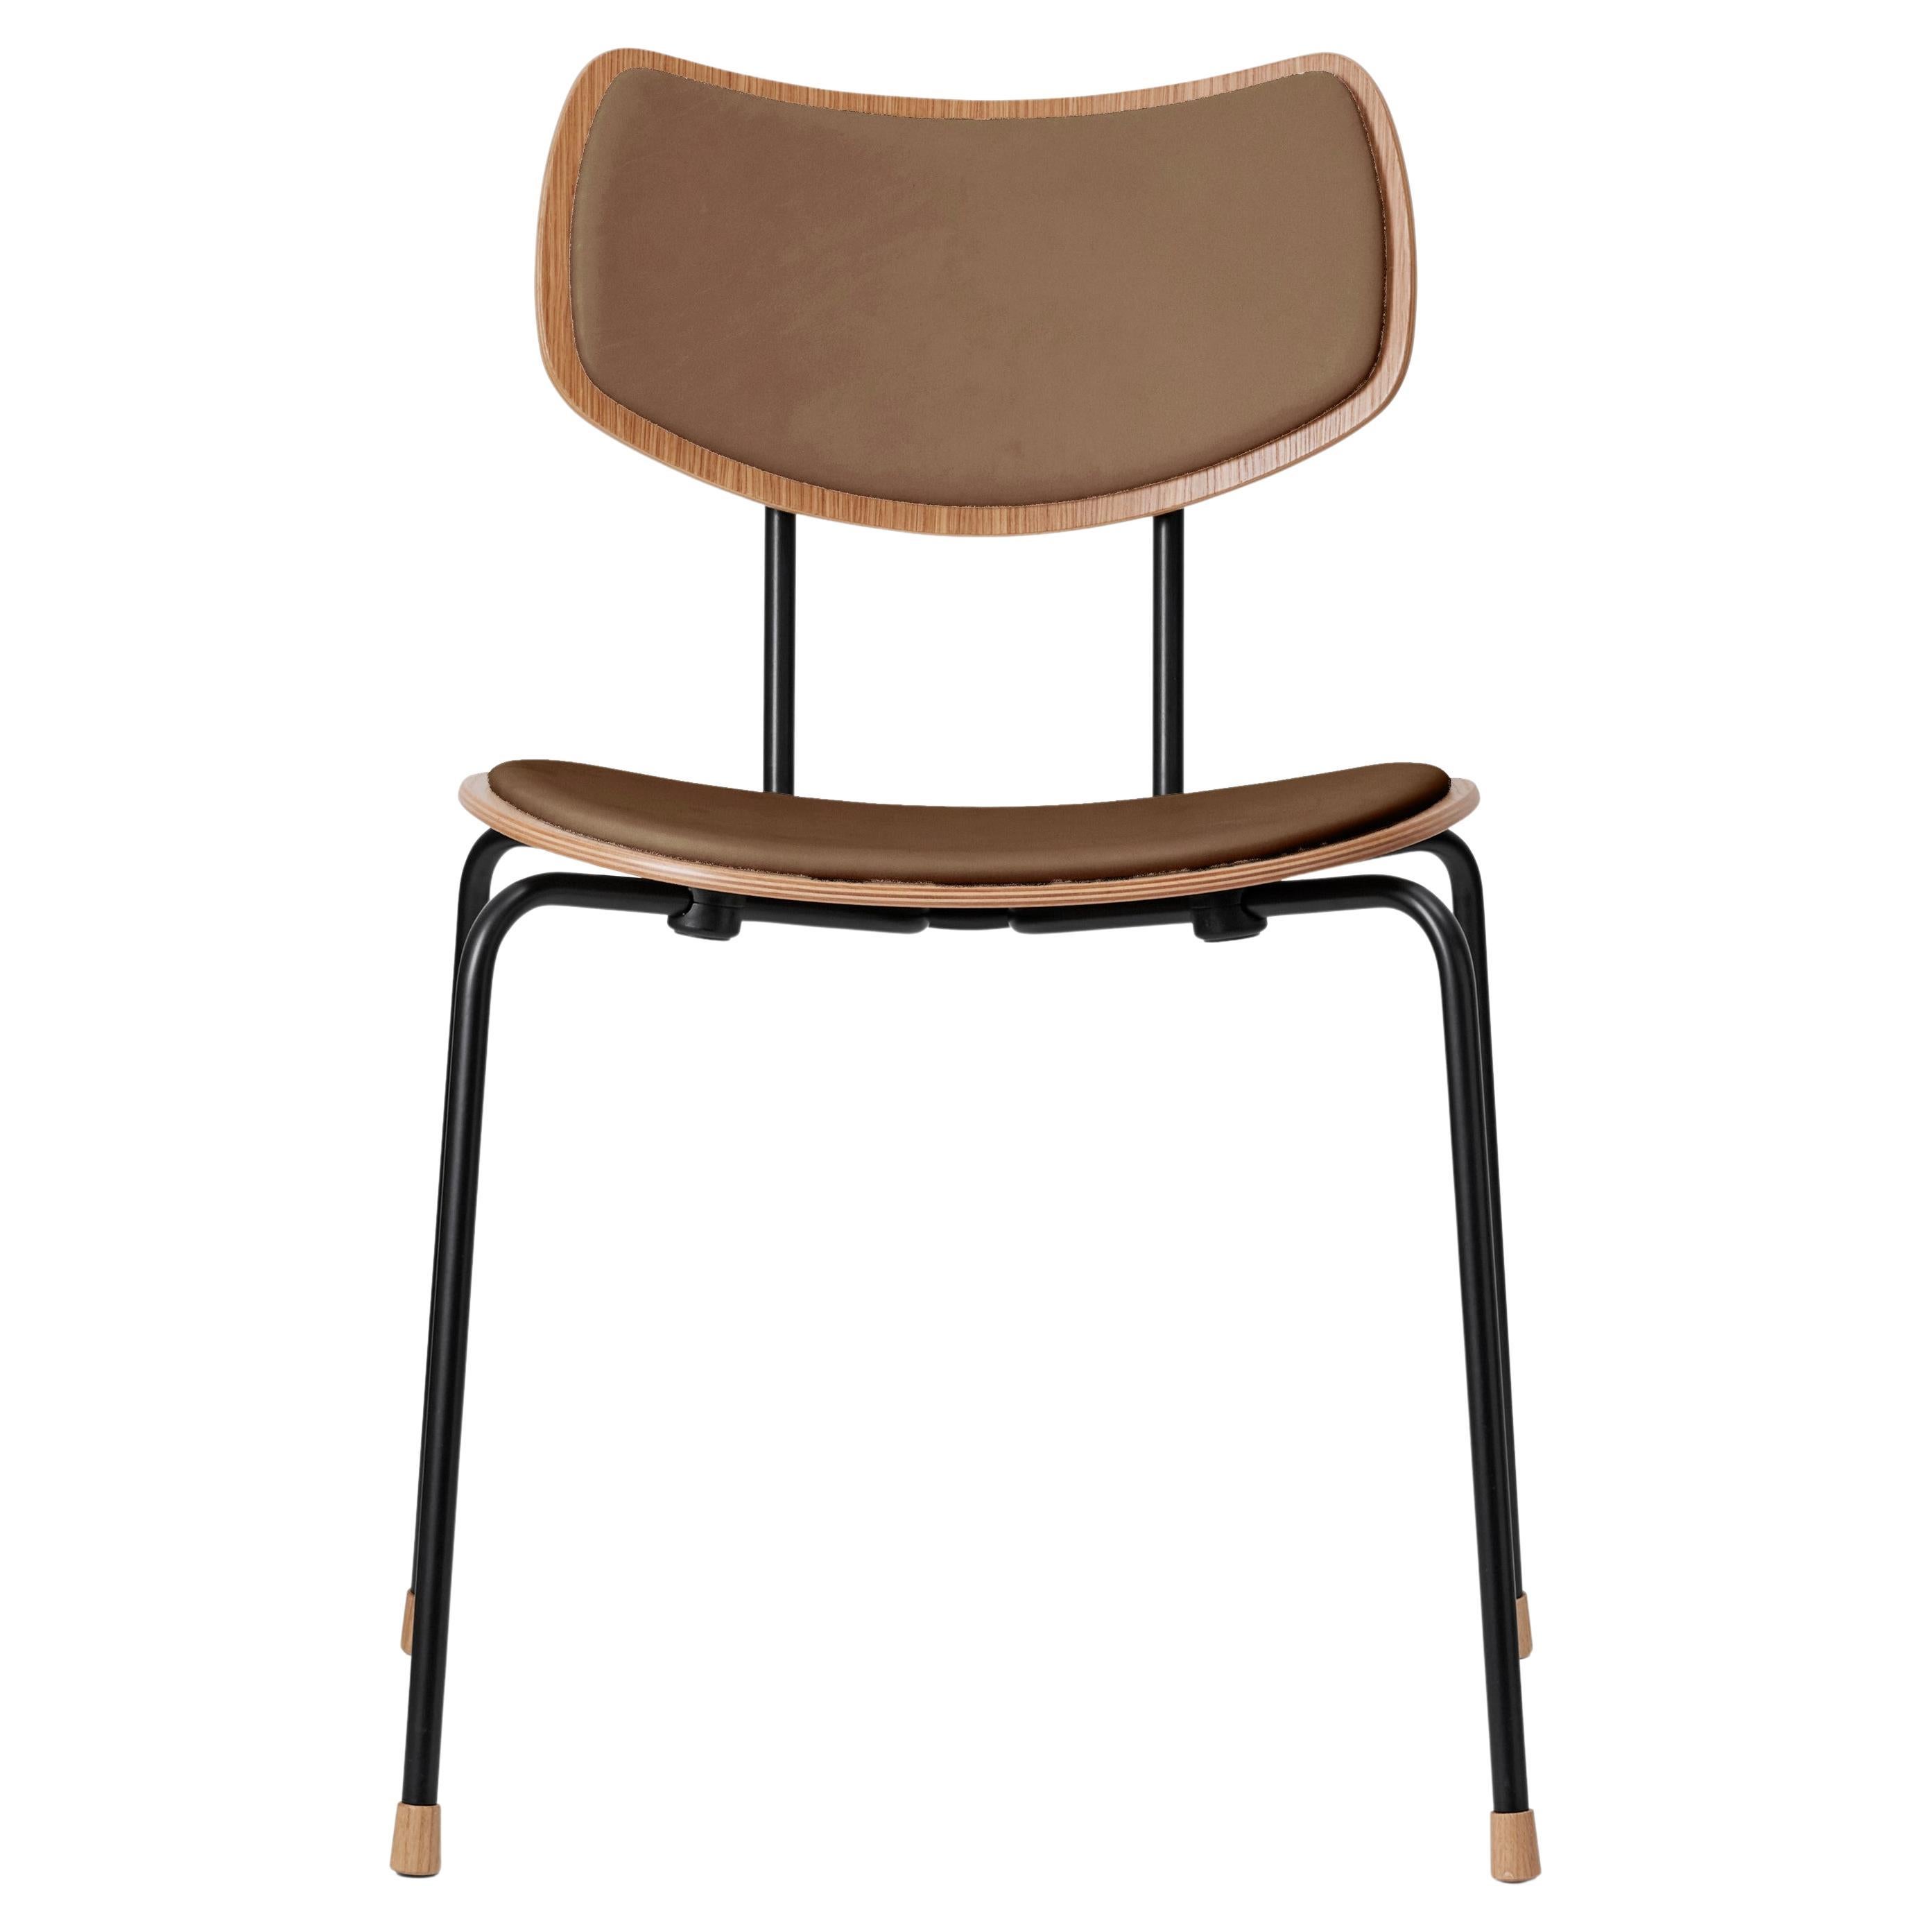 Carl Hansen Vega Series Chair in Edelman's Oath Leather by Ilse Crawford For Sale